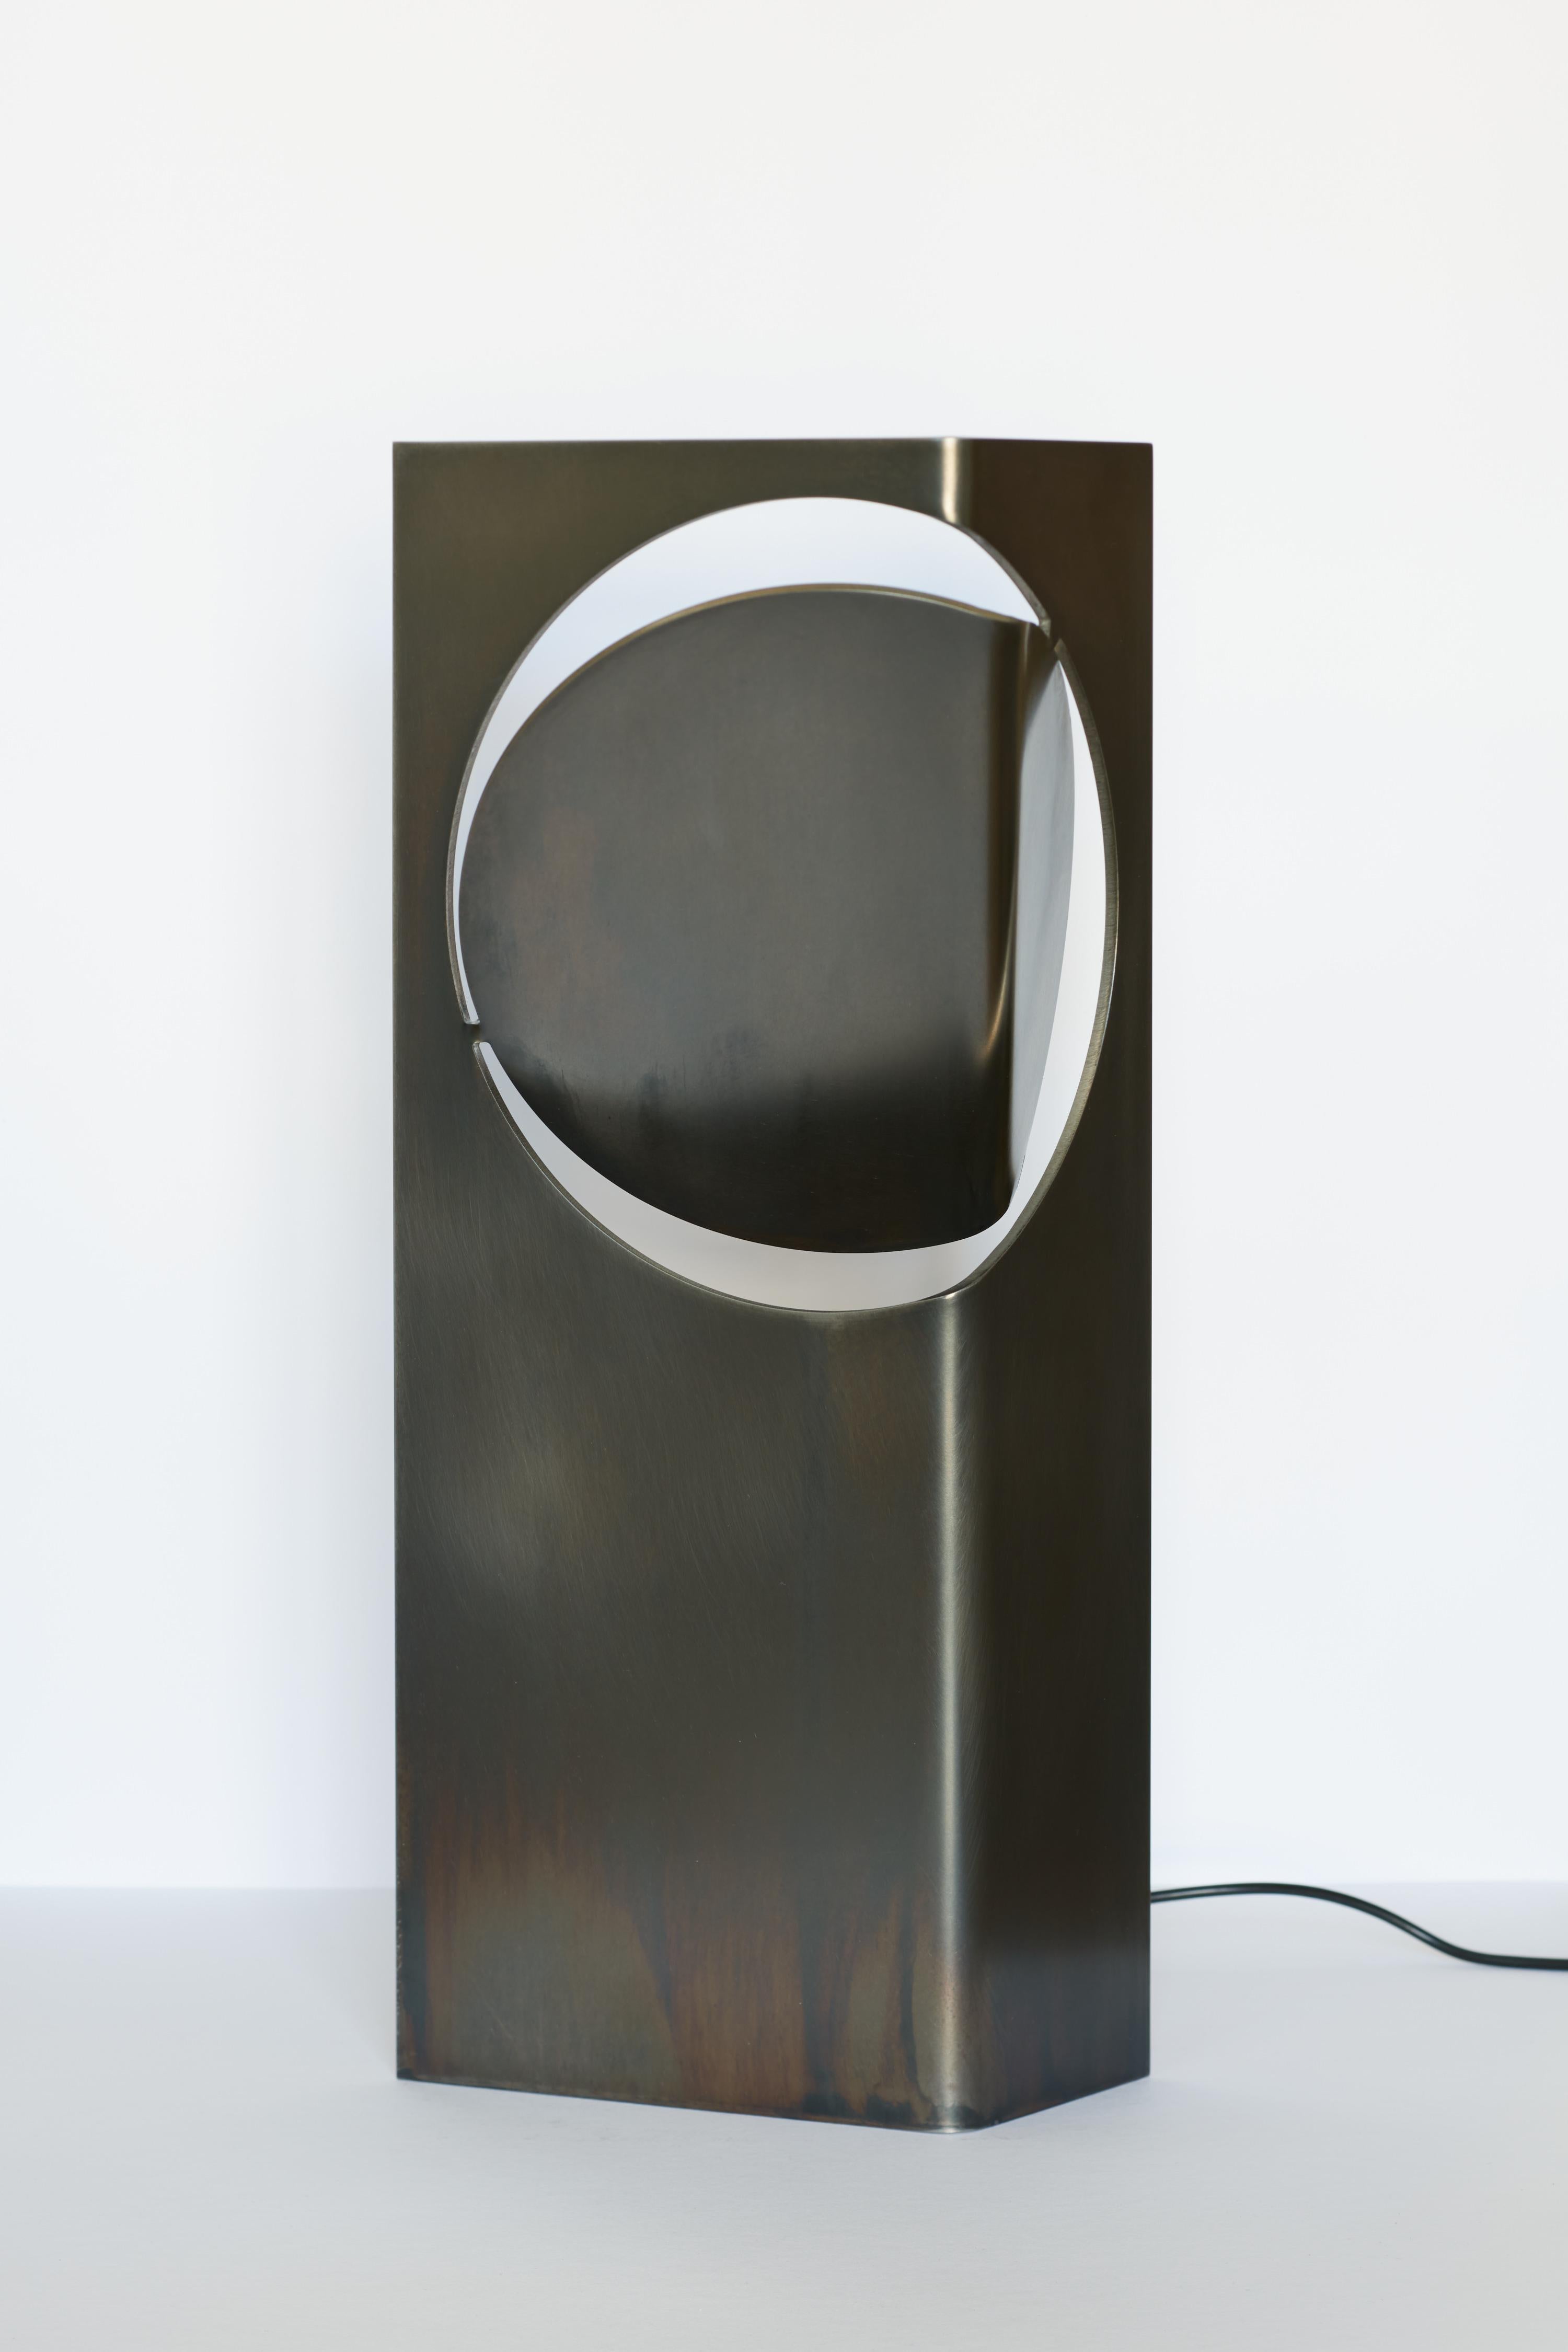 ONE ASYMMETRIC Table Light Stainless Steel Rich Black Patina by Frank Penders In New Condition For Sale In Amsterdam, NL